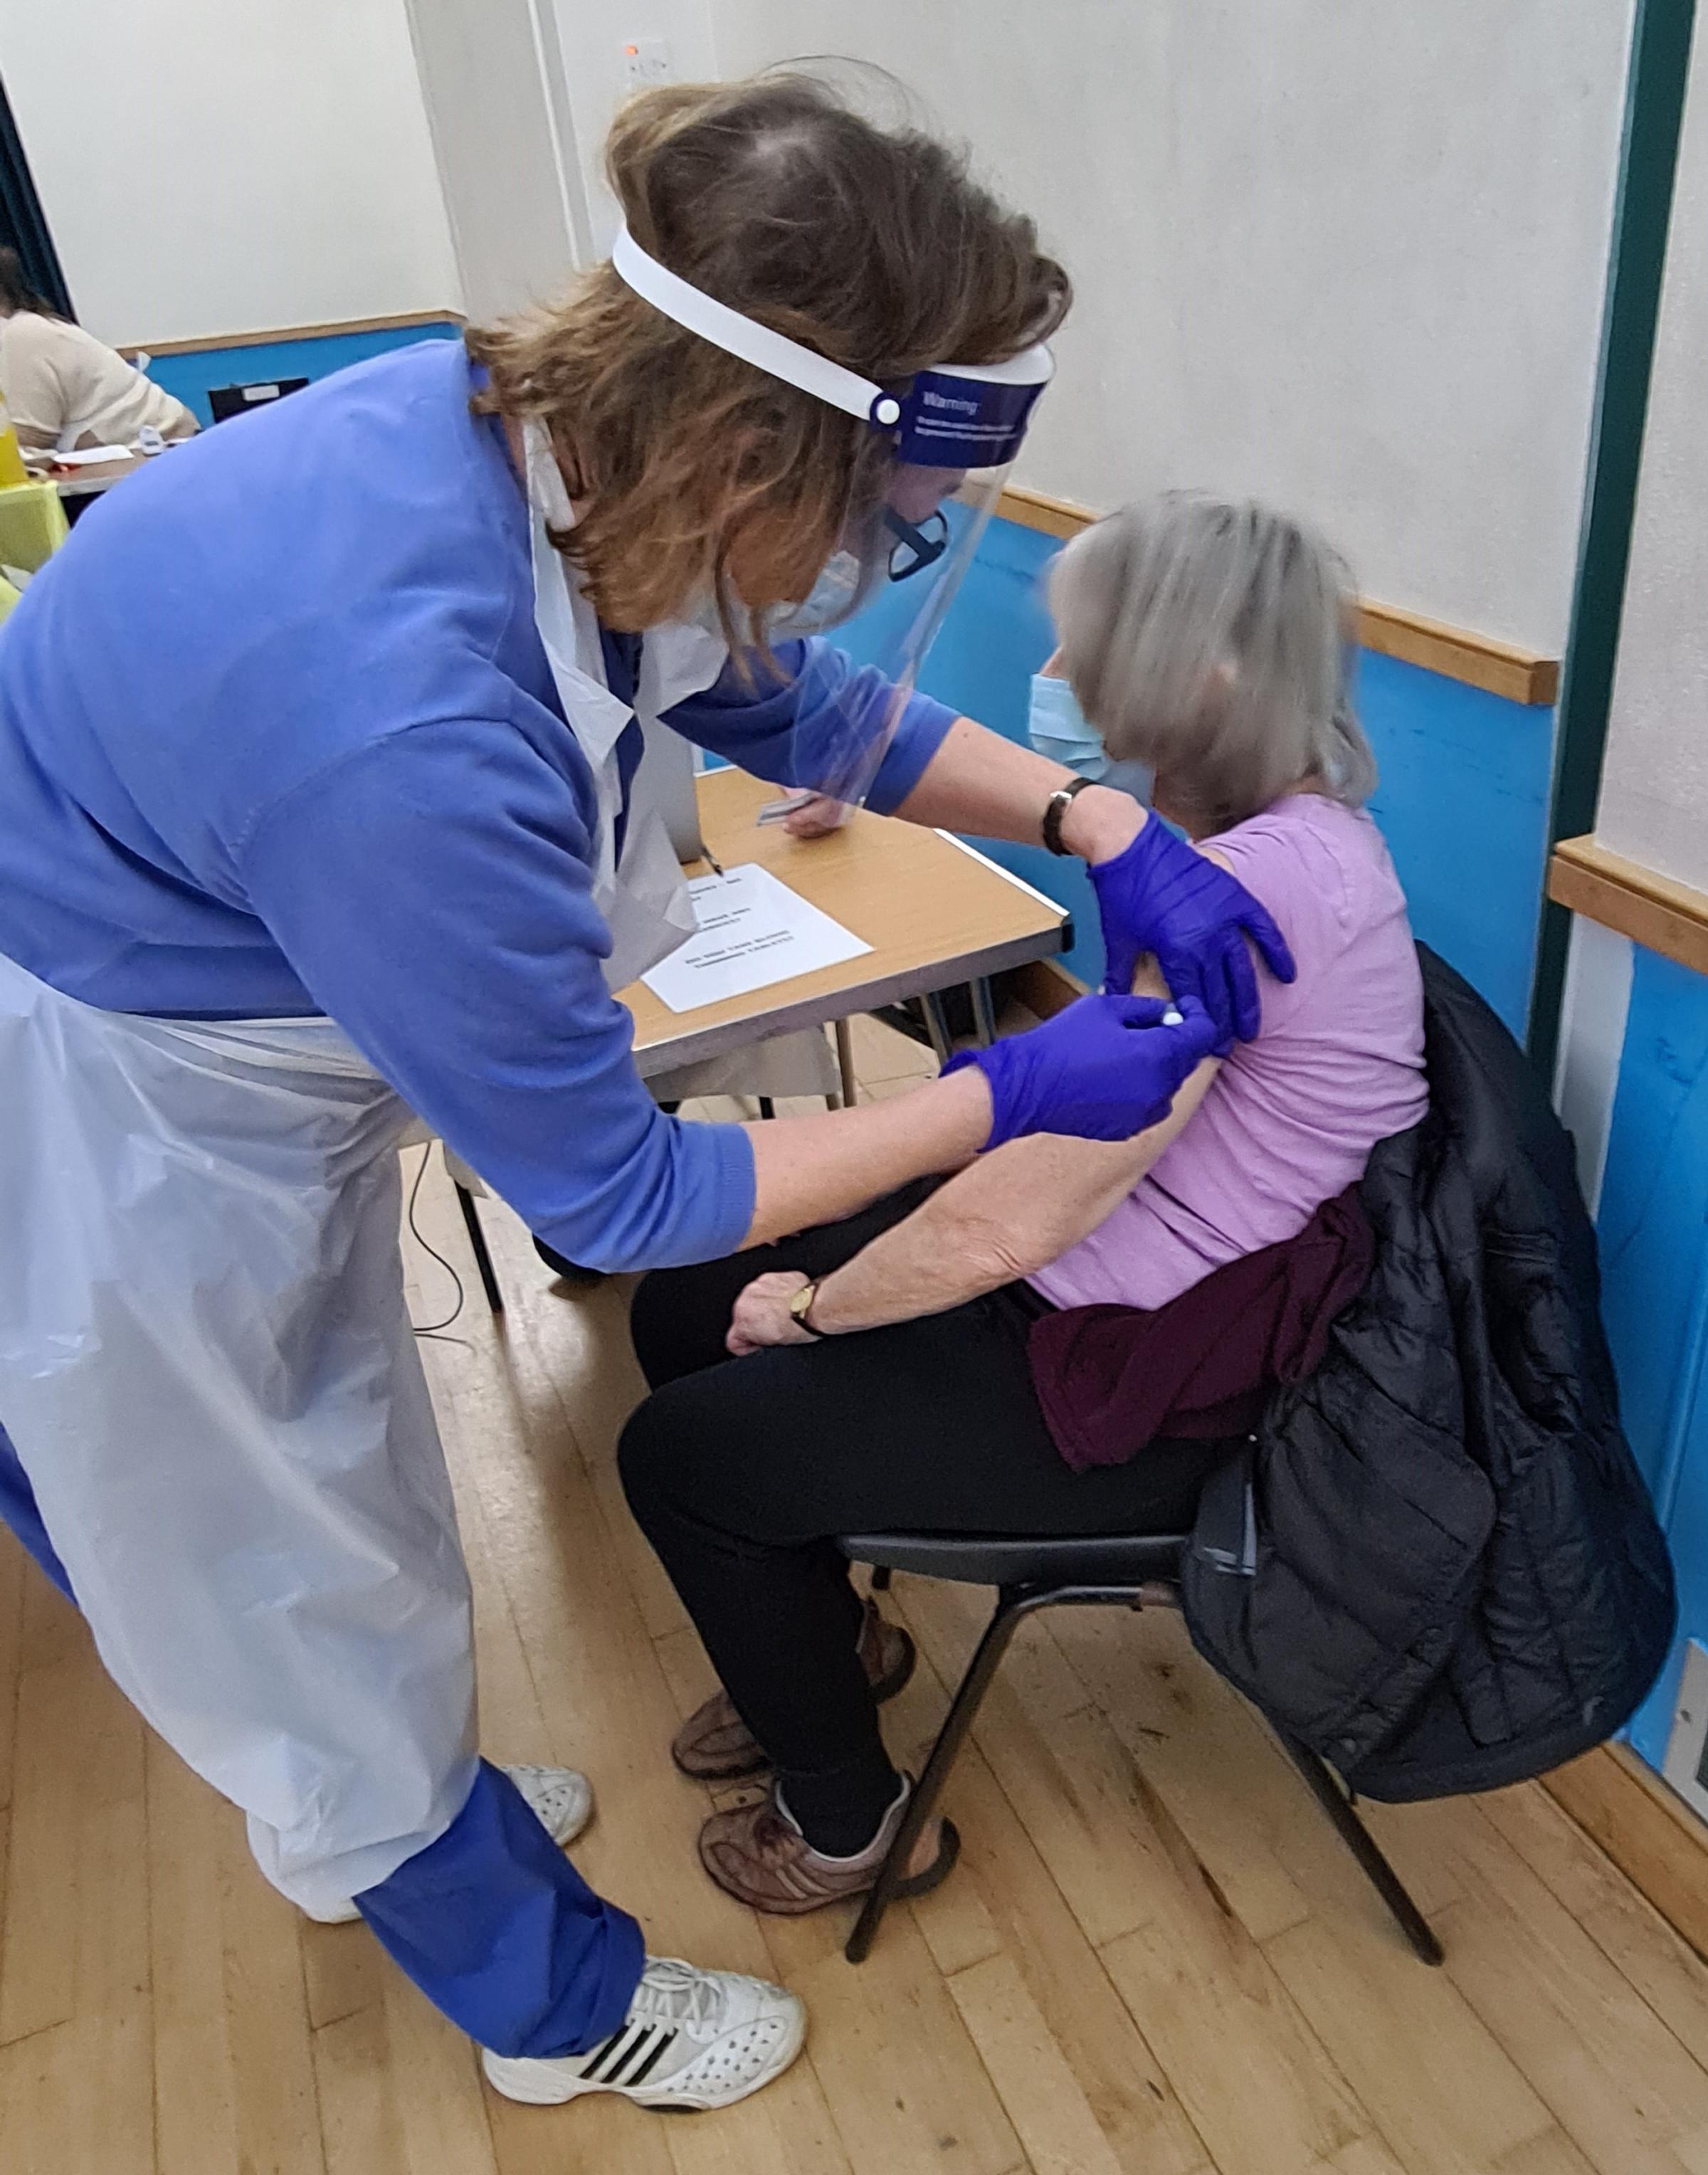 Dr Goddard receiving her second jab at around 6.30pm on Wednesday at Allum Hall. Credit: Tony Battison